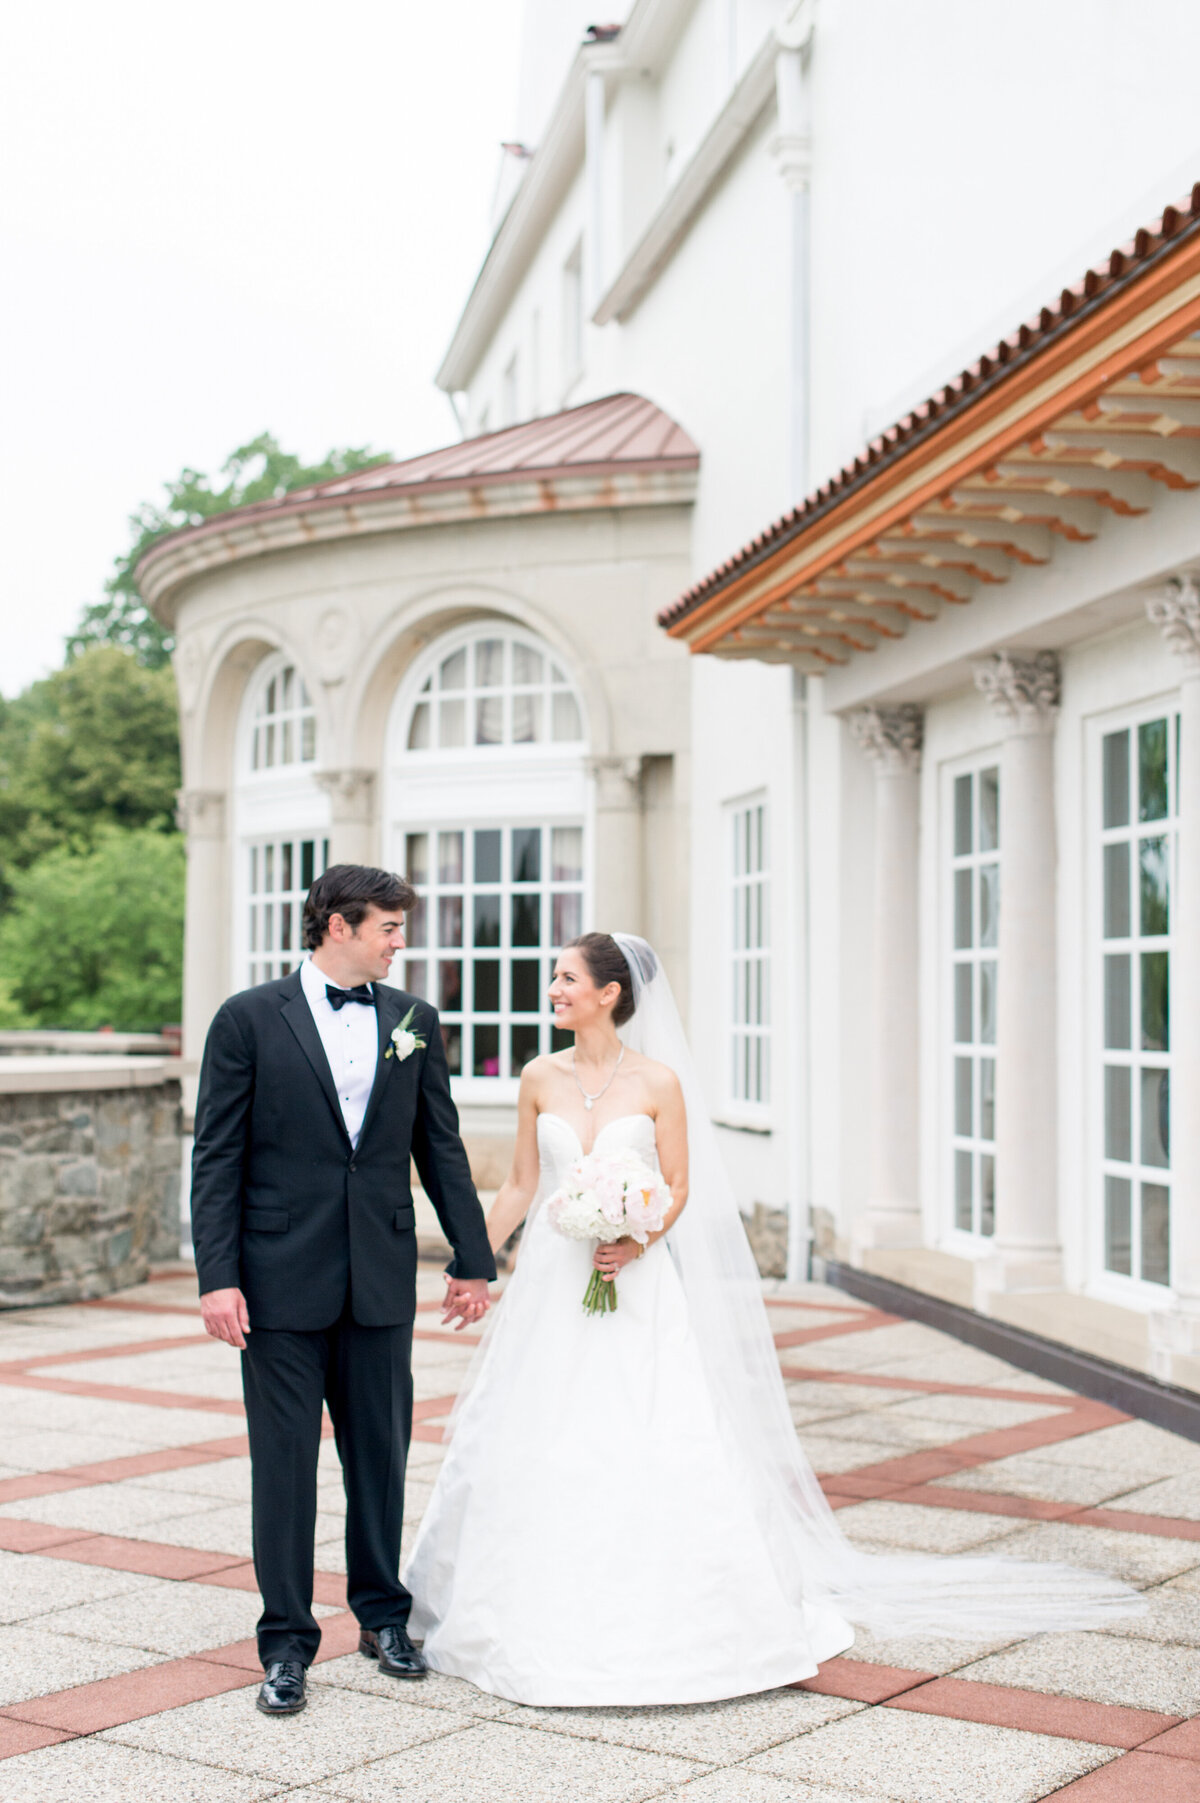 Bride and groom at Congressional Country Club wedding day for iconic Washington DC wedding celebration